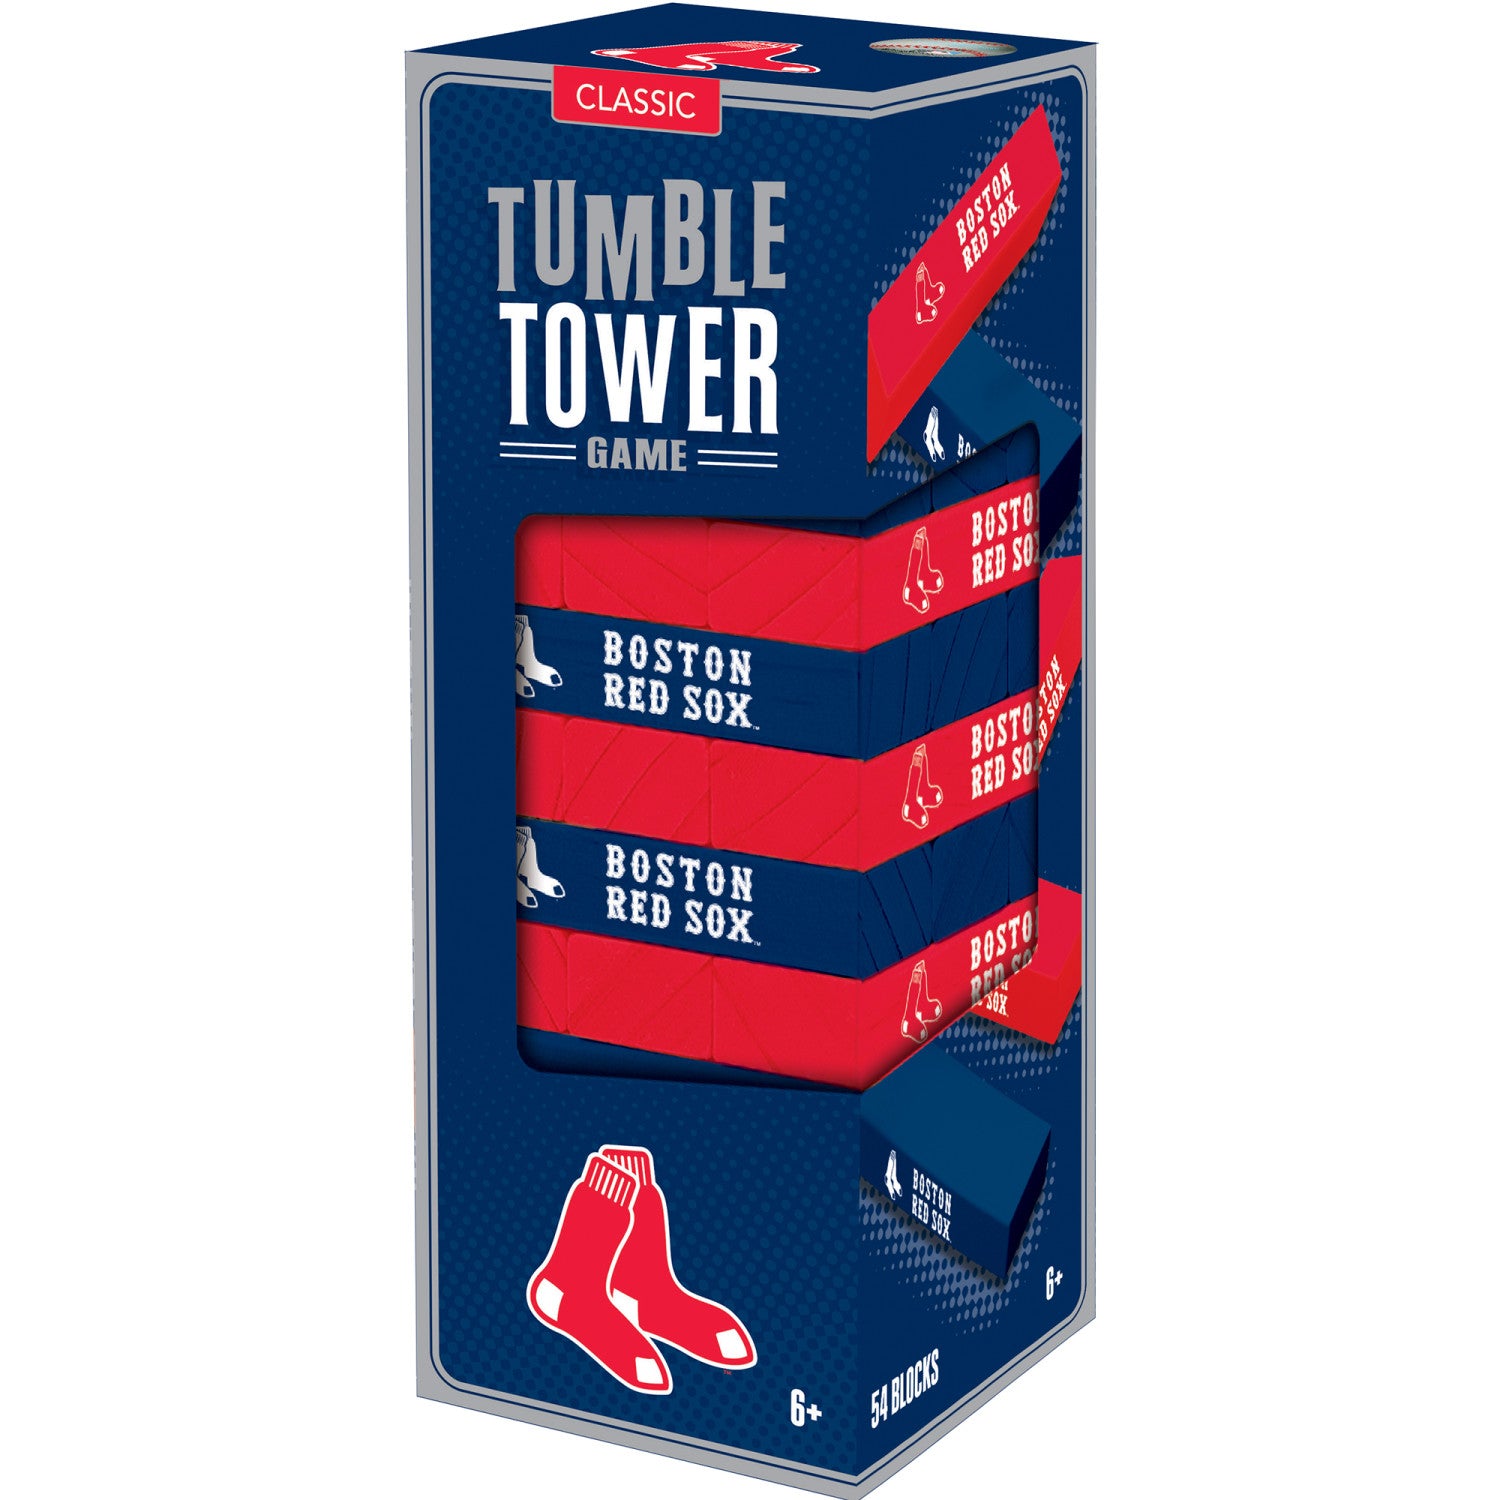 Boston Red Sox Tumble Tower